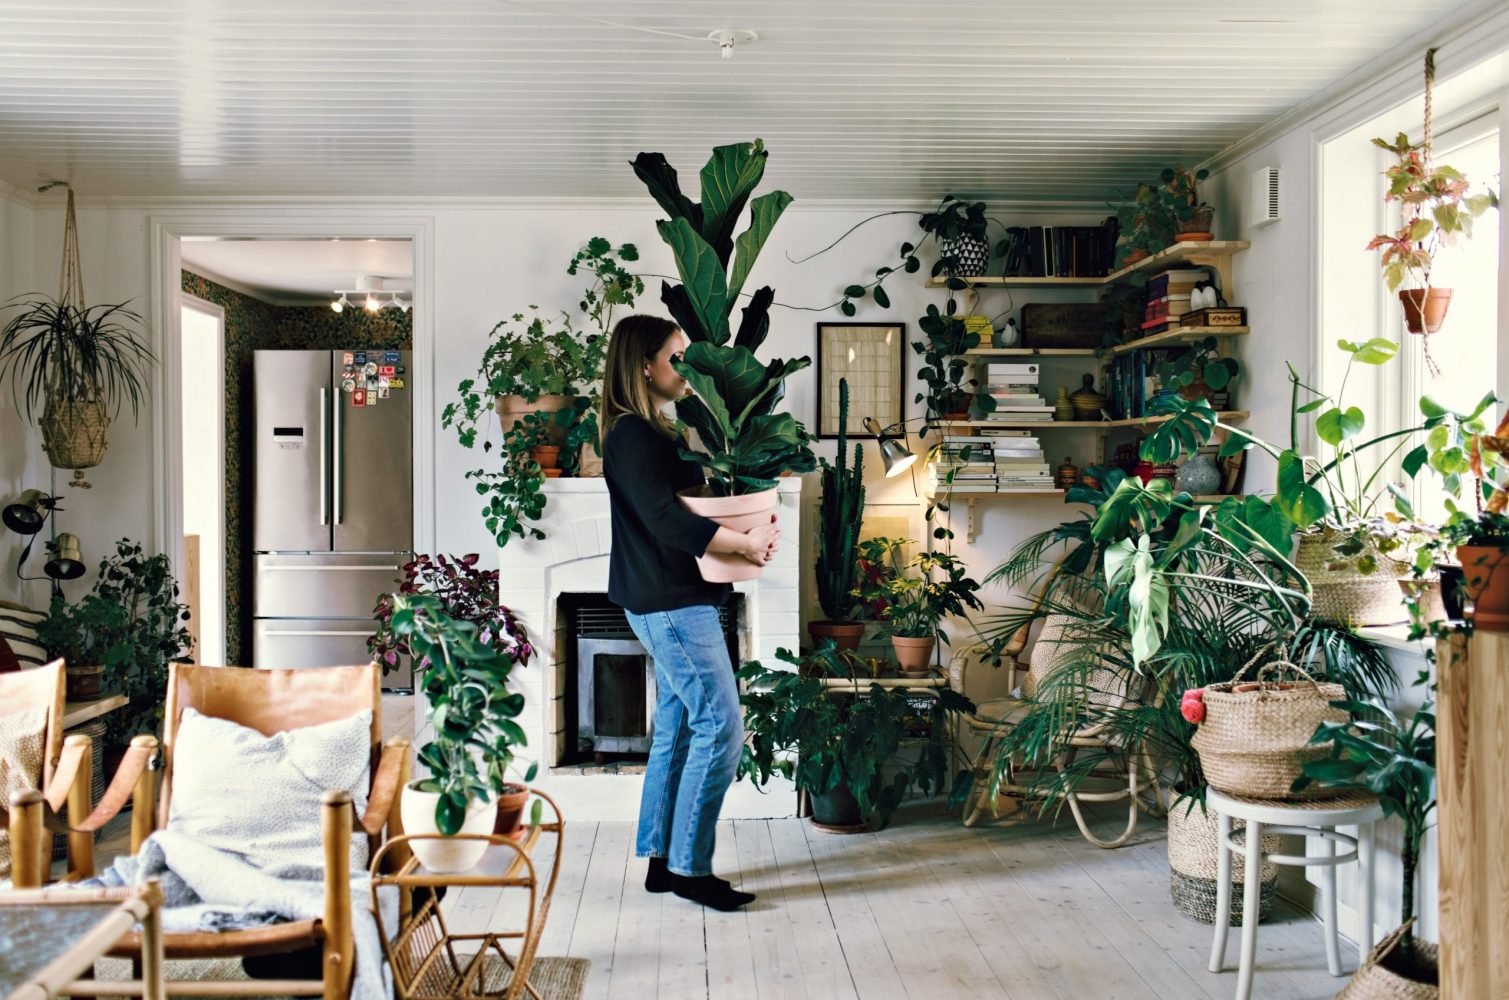 An apartment filled with green life in every corner, with a woman carrying her tall fiddle leaf fig walking across the room.